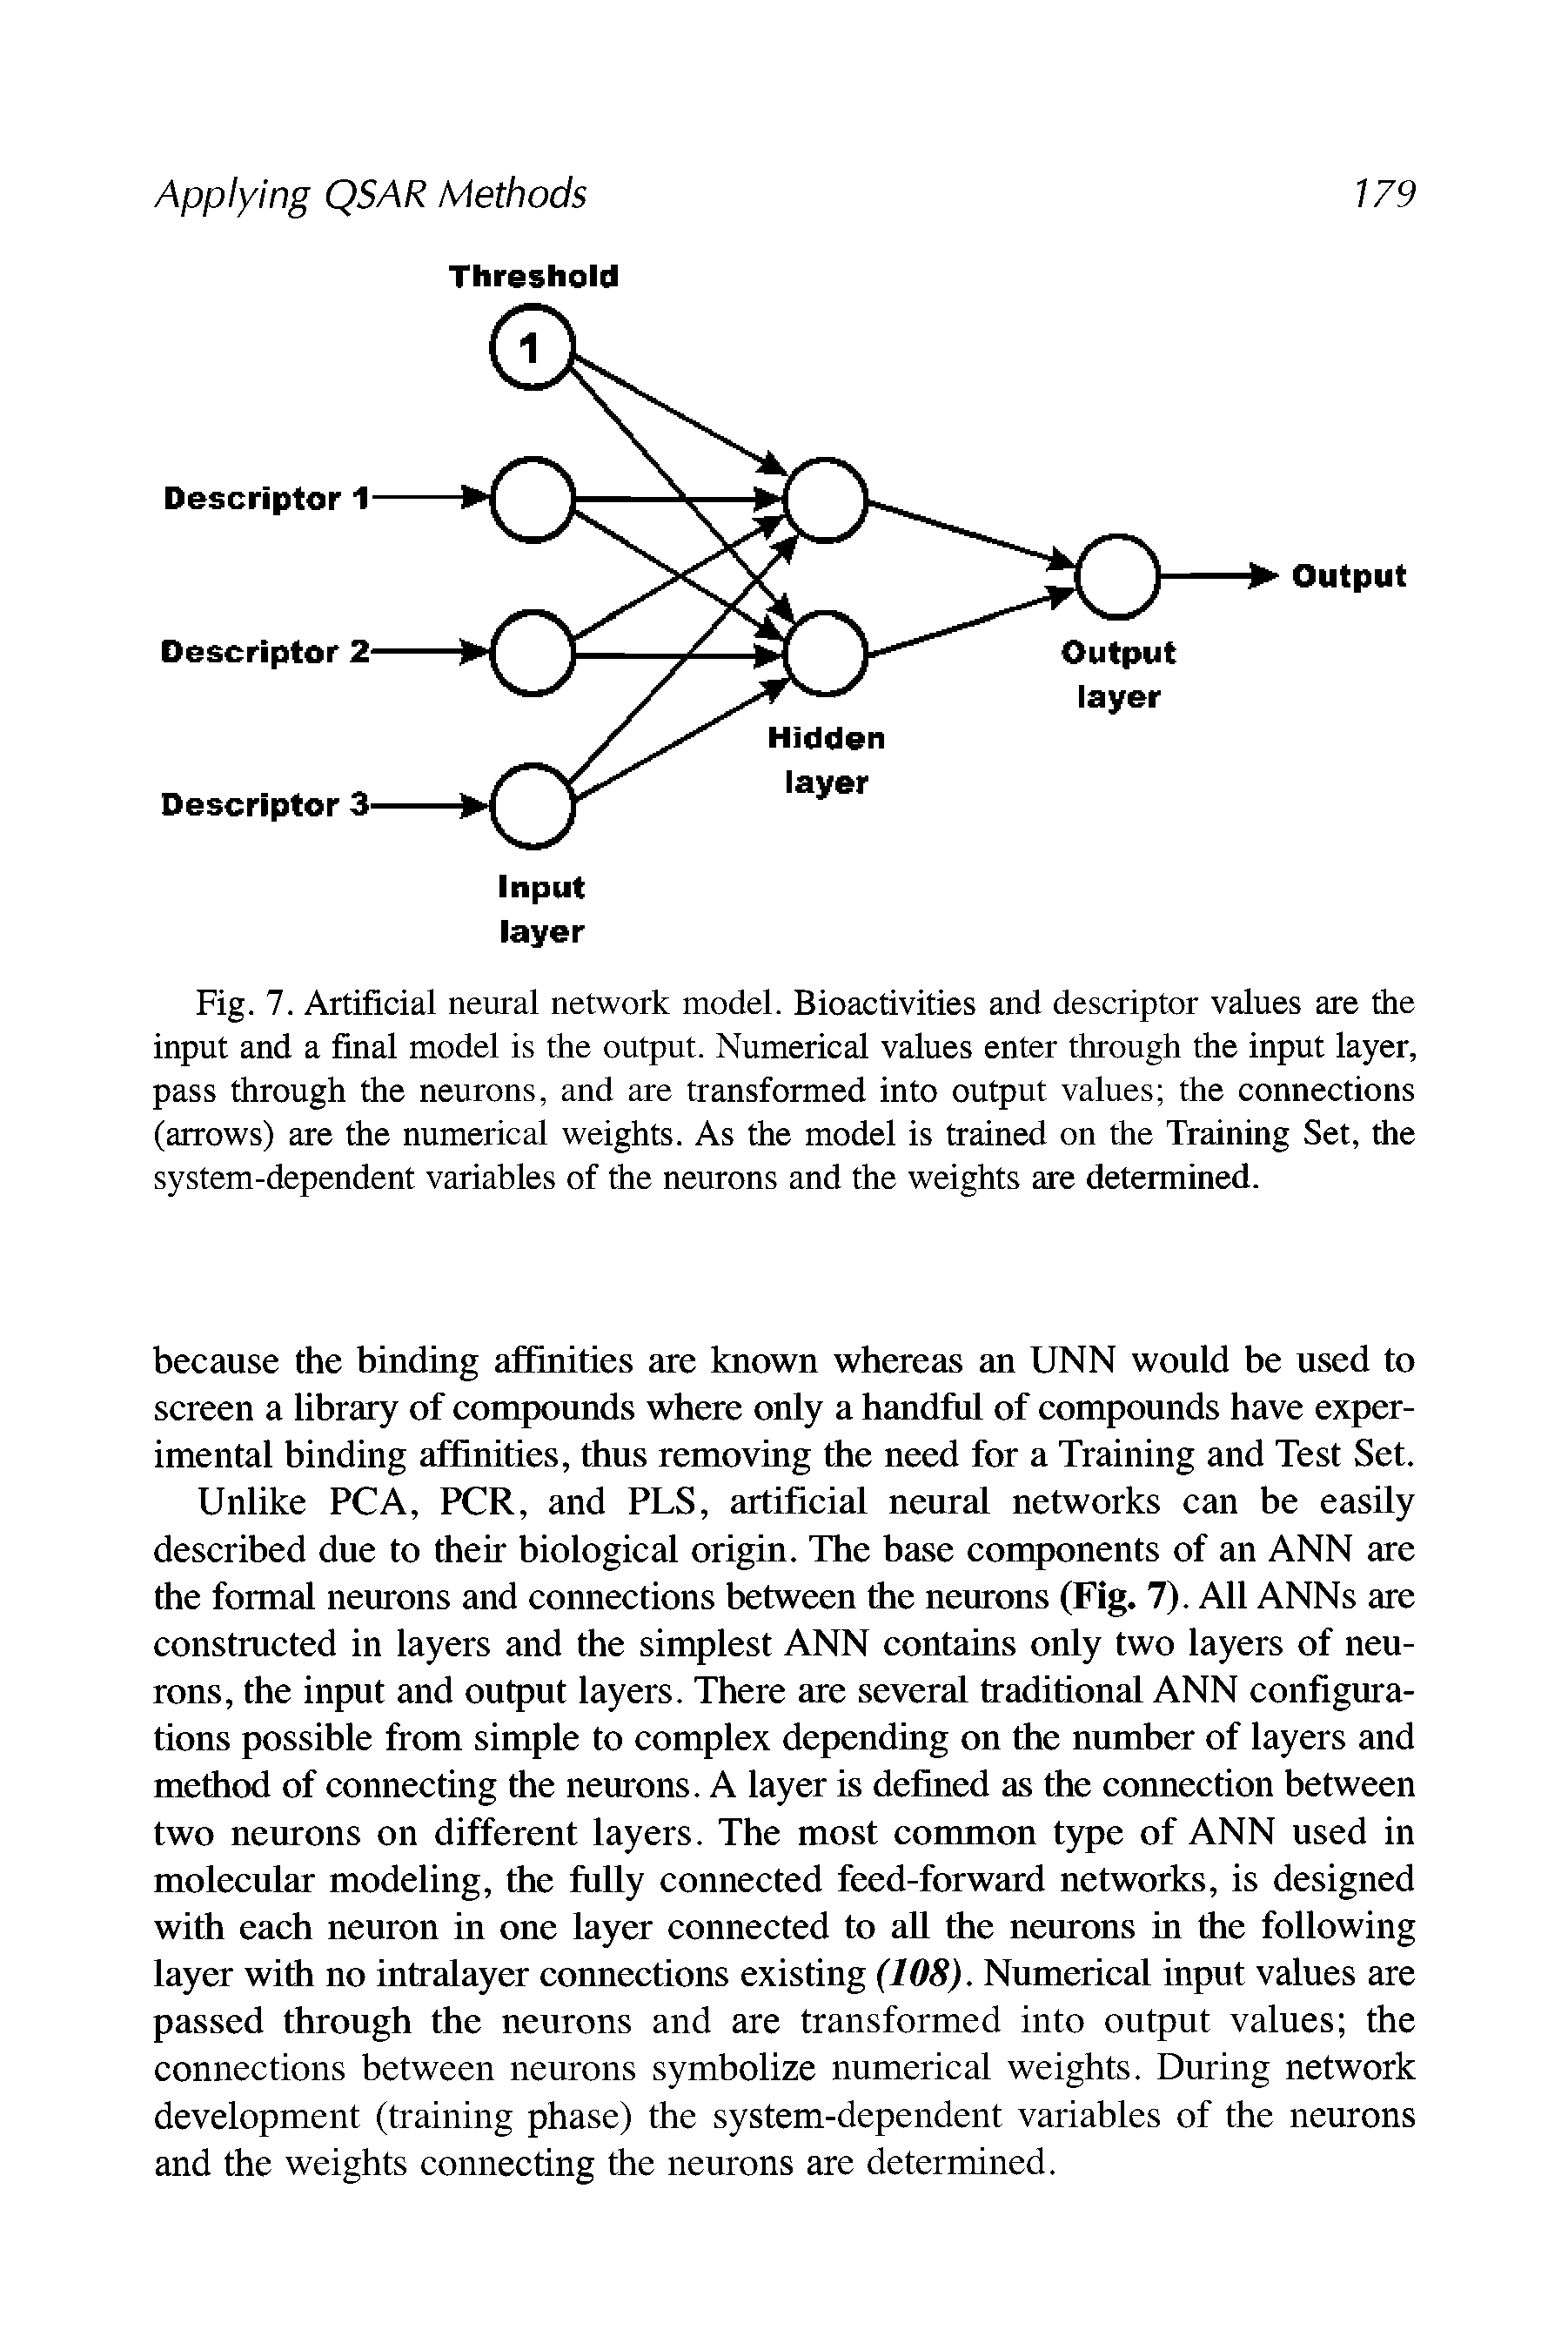 Fig. 7. Artificial neural network model. Bioactivities and descriptor values are the input and a final model is the output. Numerical values enter through the input layer, pass through the neurons, and are transformed into output values the connections (arrows) are the numerical weights. As the model is trained on the Training Set, the system-dependent variables of the neurons and the weights are determined.